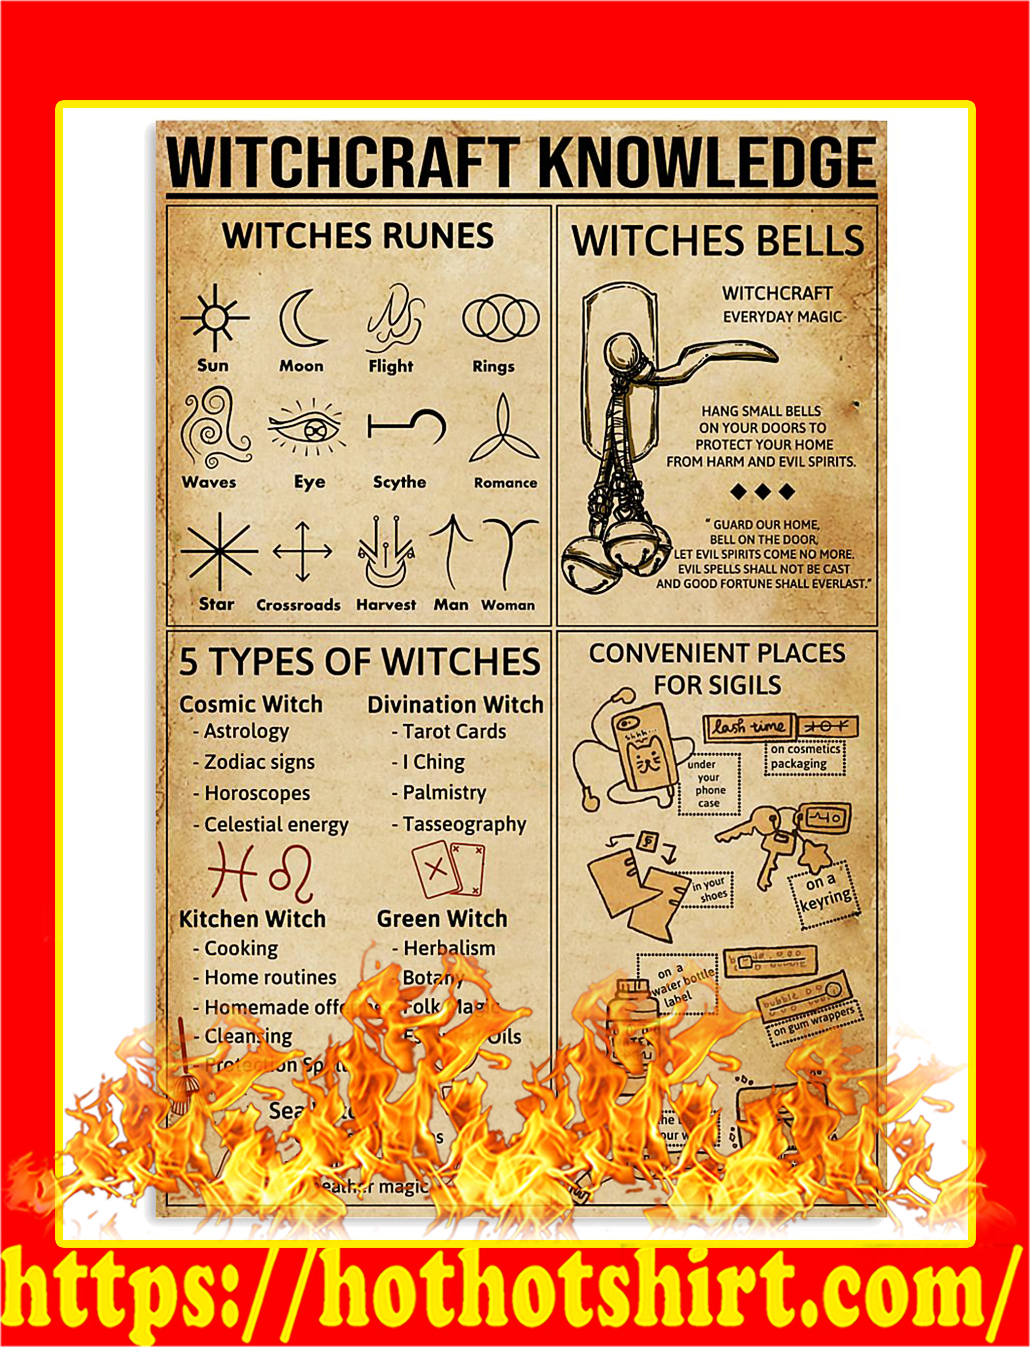 Witchcraft Knowledge Poster